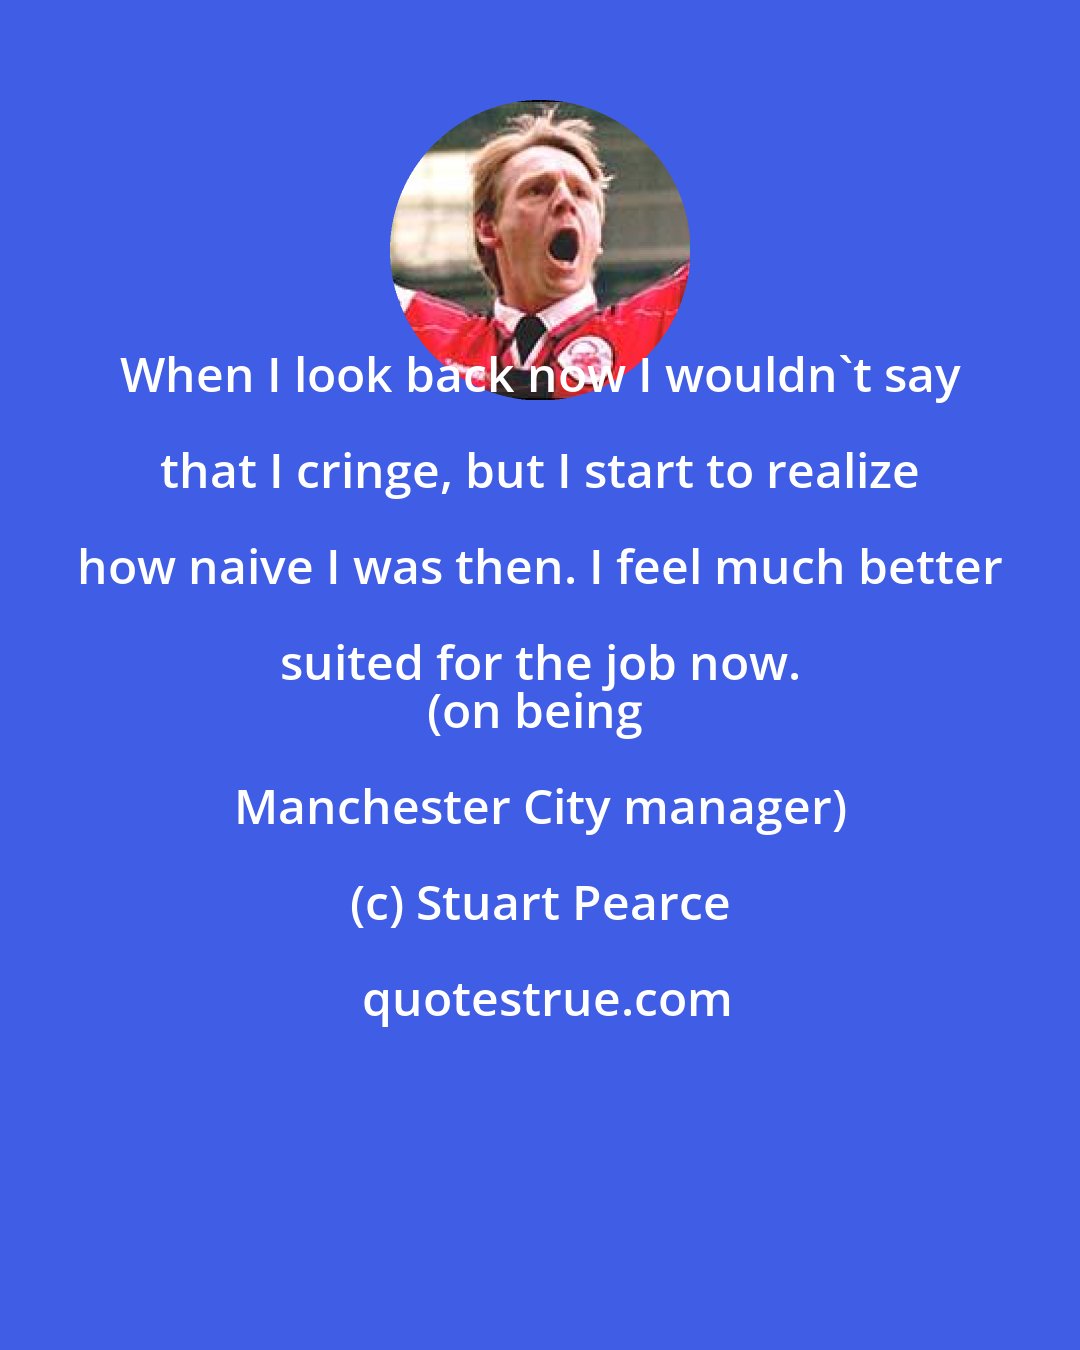 Stuart Pearce: When I look back now I wouldn't say that I cringe, but I start to realize how naive I was then. I feel much better suited for the job now. 
(on being Manchester City manager)